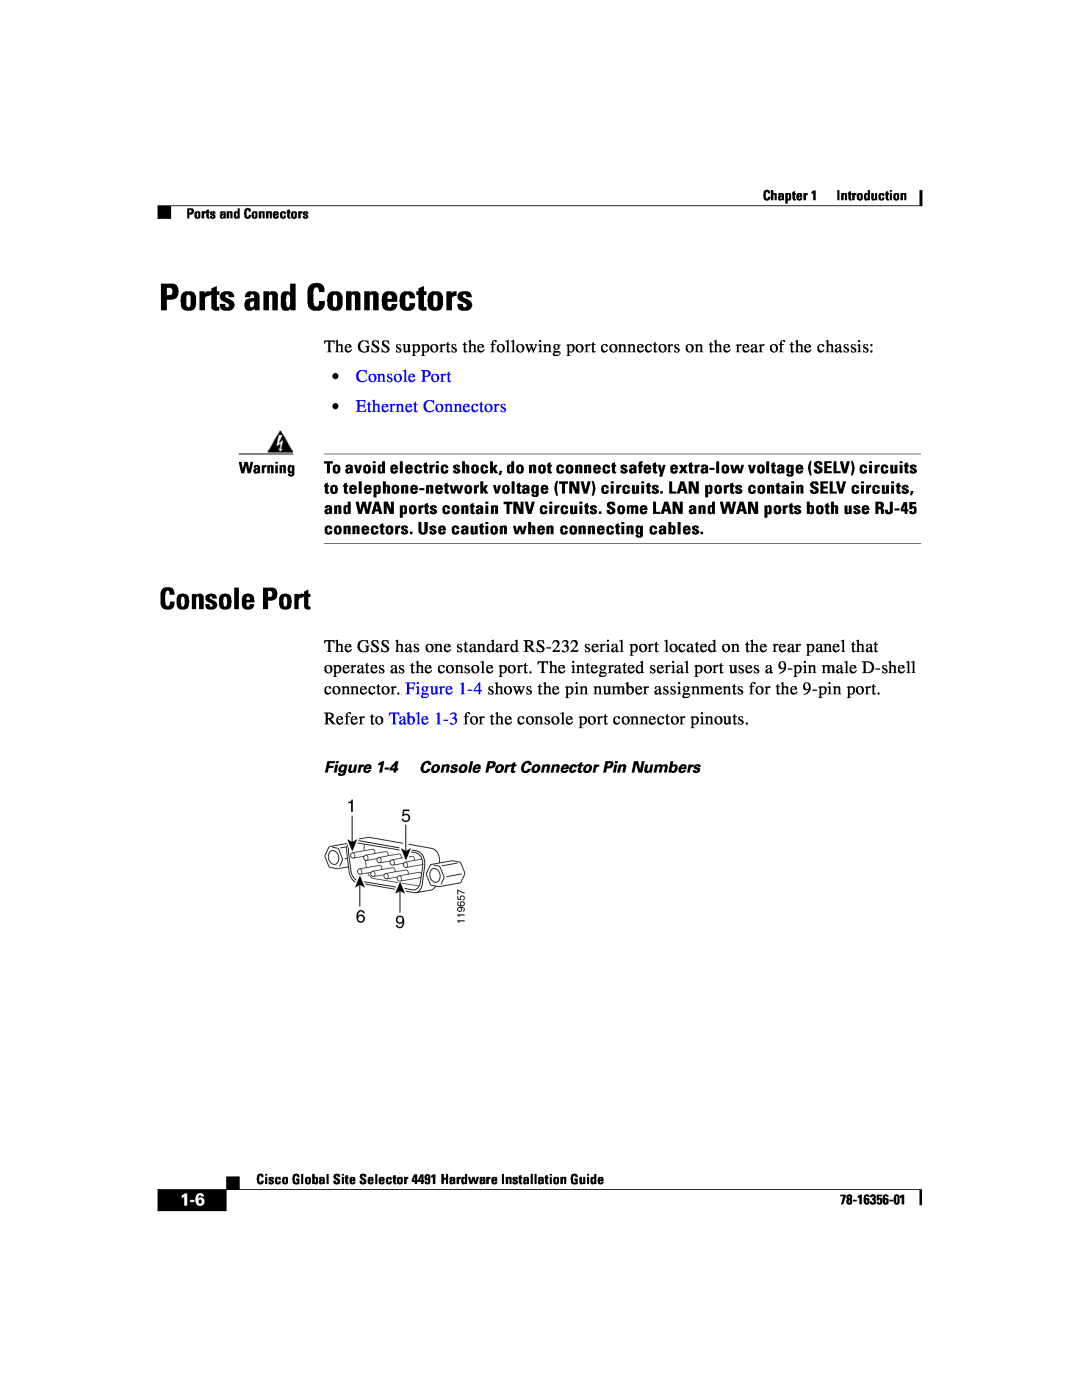 Cisco Systems 78-16356-01 manual Ports and Connectors, Console Port Ethernet Connectors 